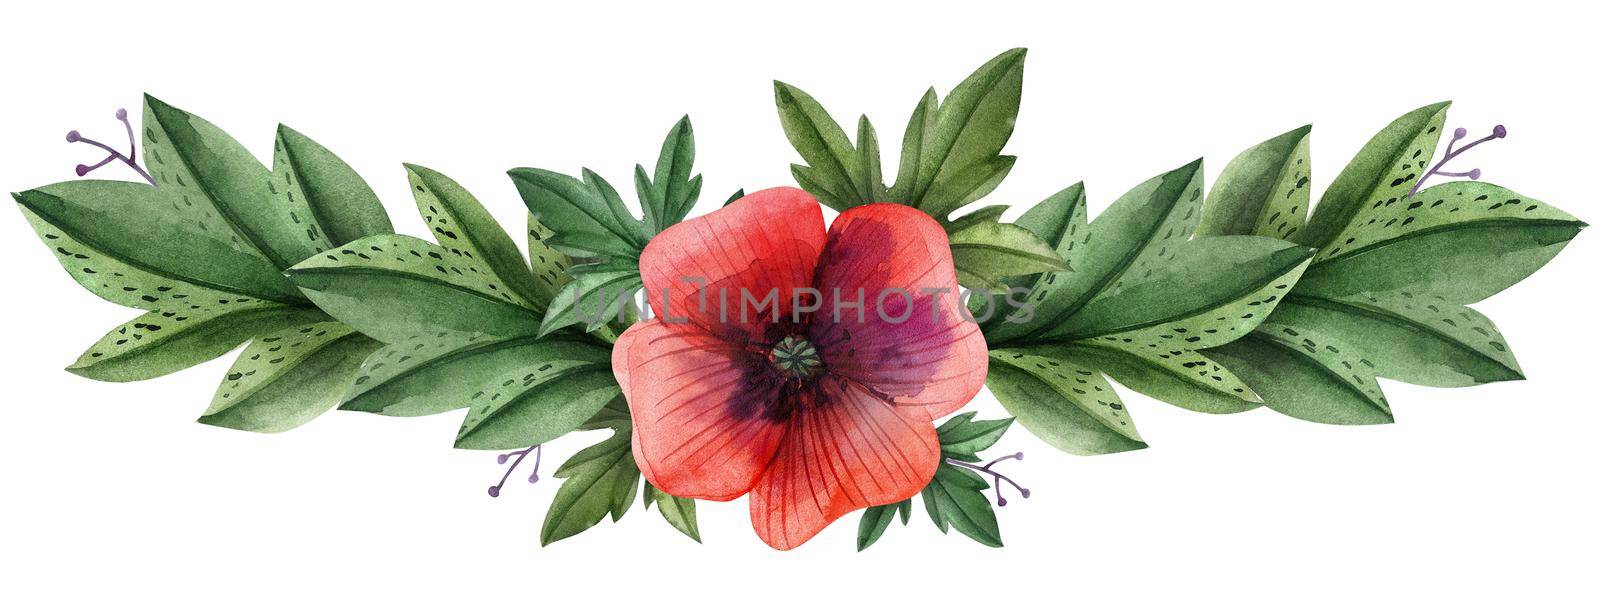 Wild Poppies hand painted watercolor headline or ending vingettes by Xeniasnowstorm